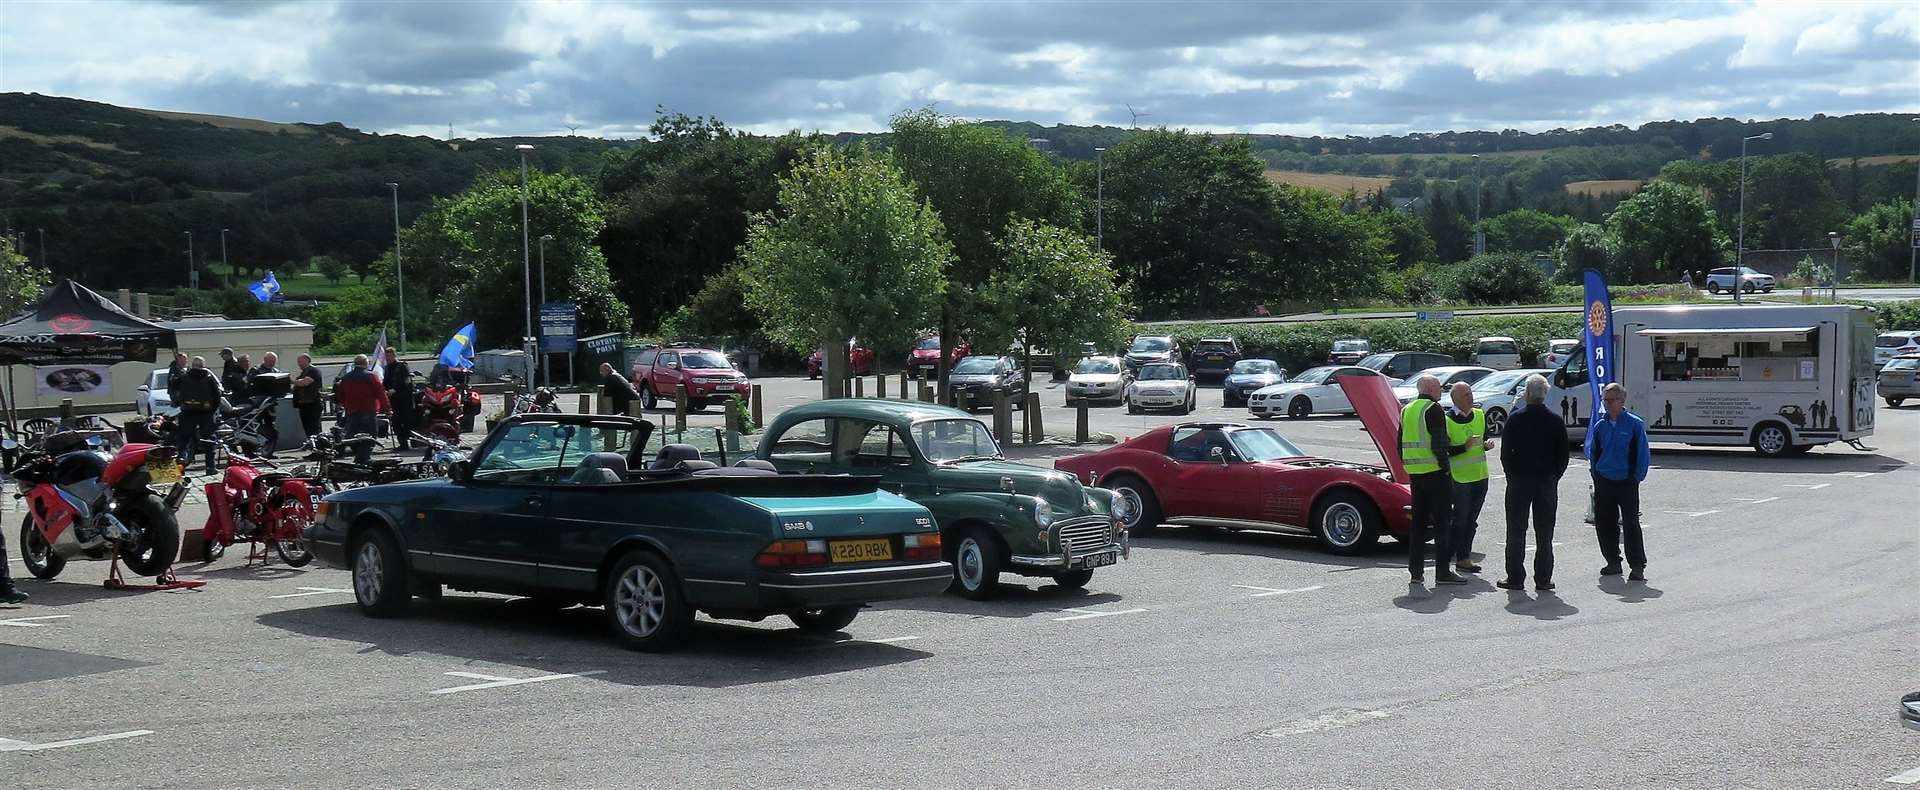 The Classic Car Experience will be held at St Mary's Car Park in Banff.